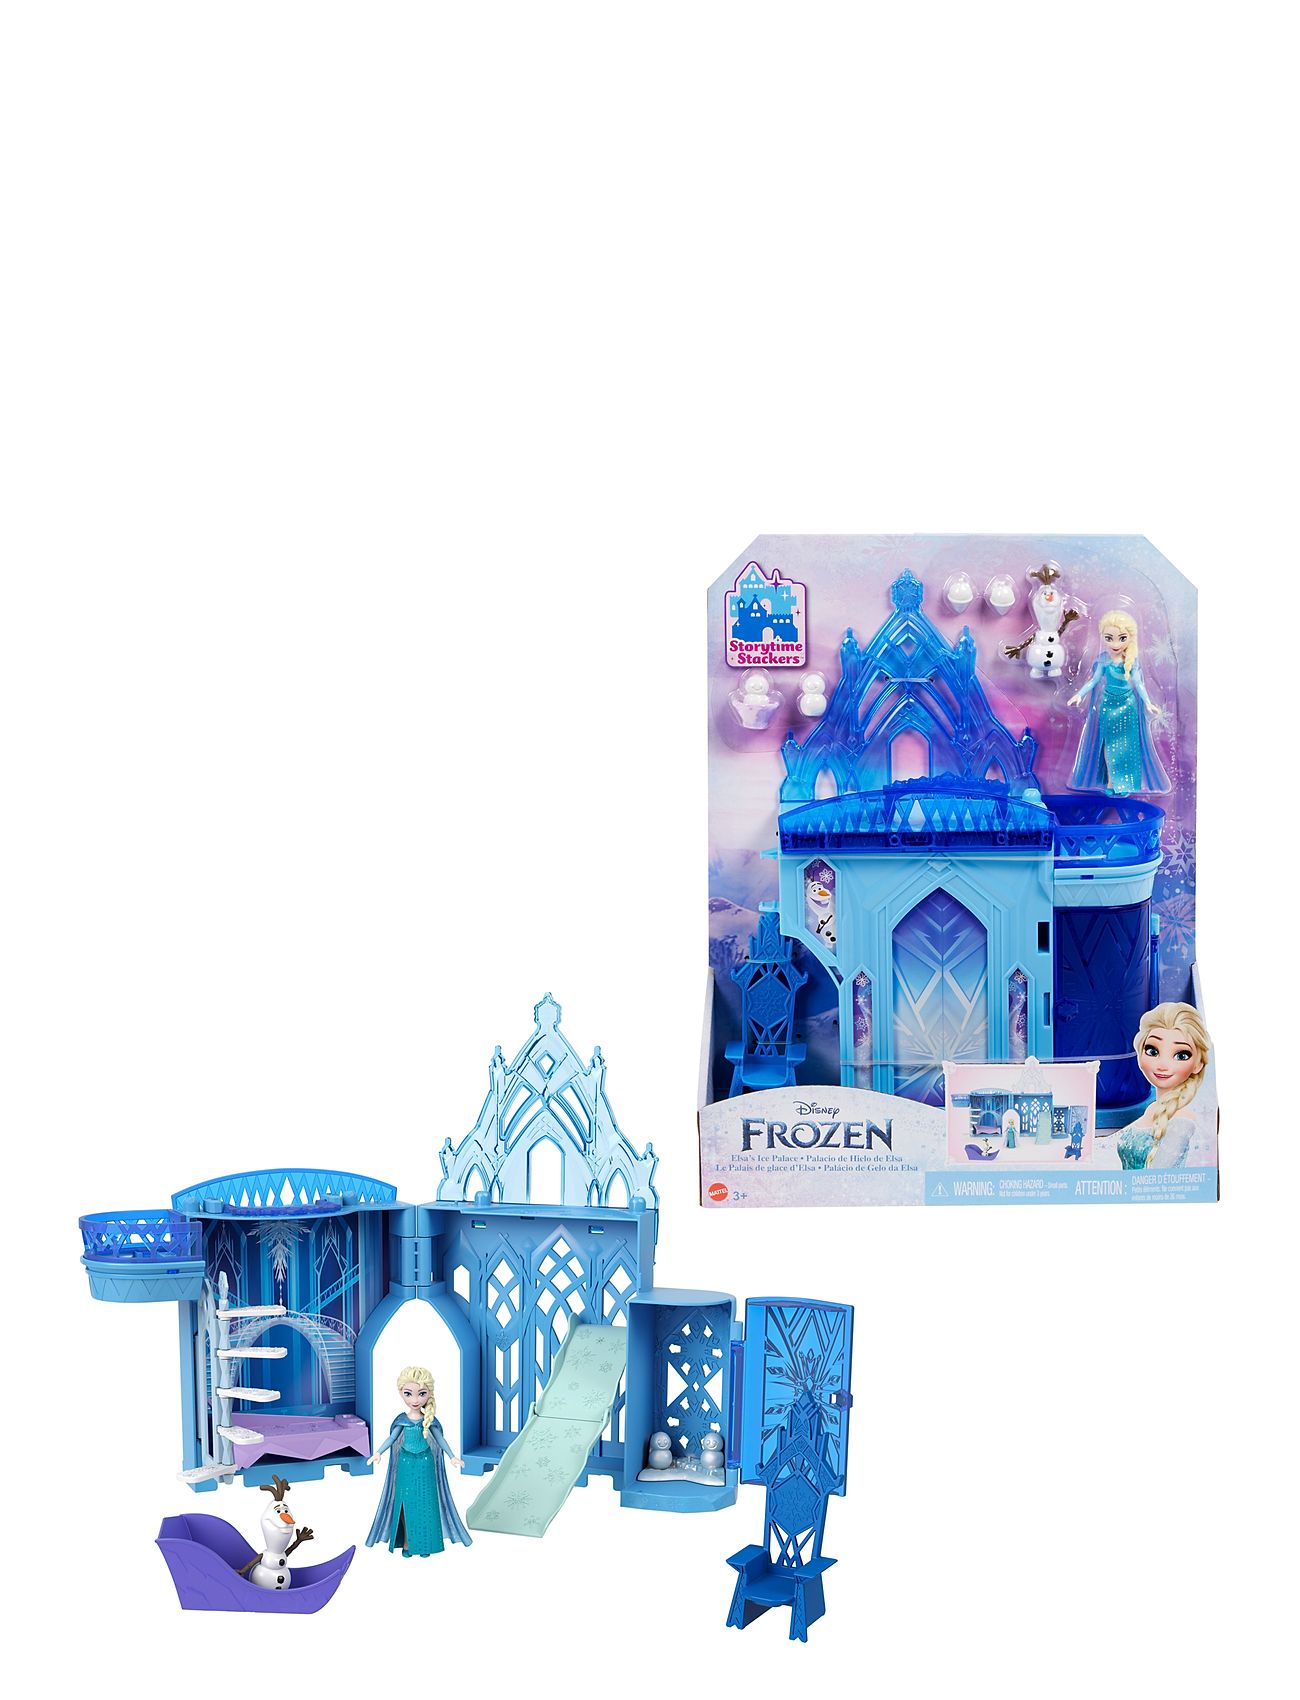 Disney Frozen Storytime Stackers Elsa's Ice Palace Toys Playsets & Action Figures Play Sets Multi/patterned Frost